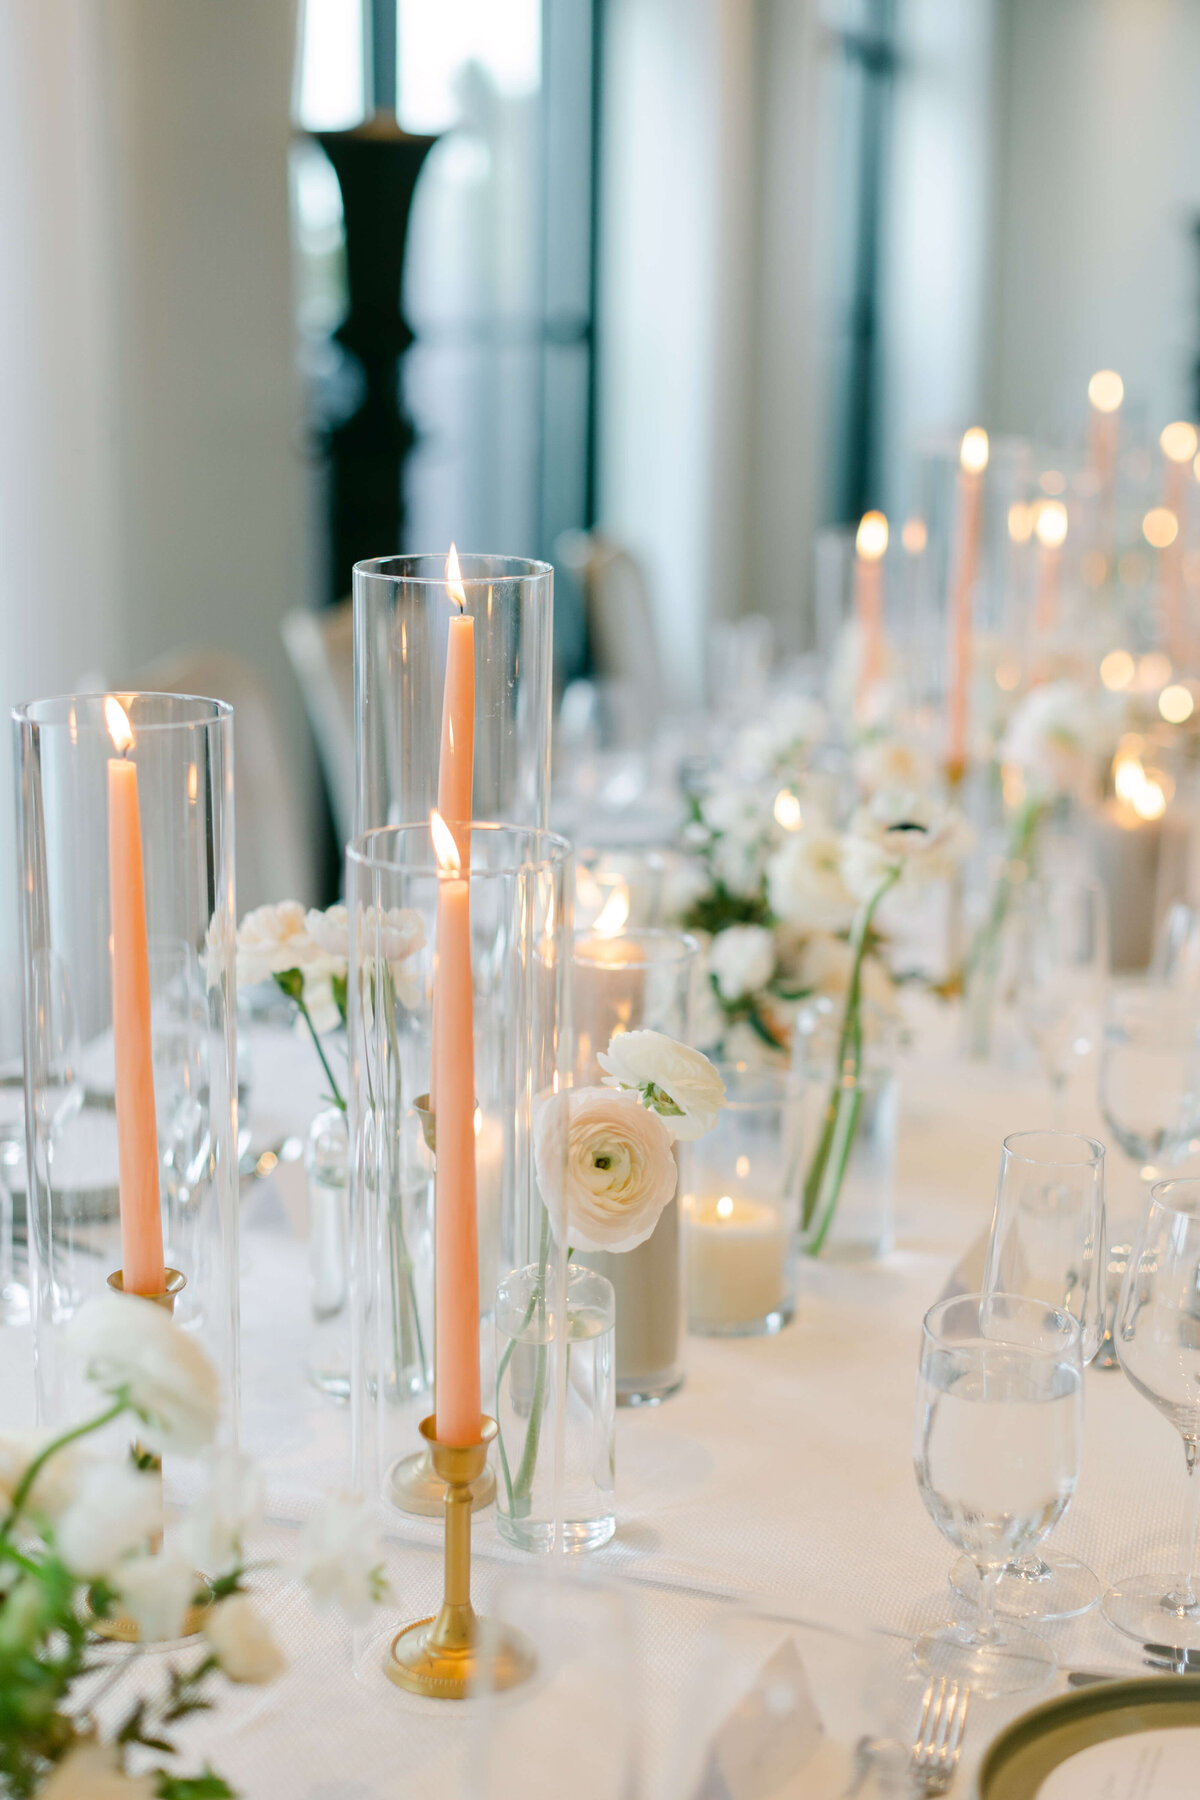 A tablescape with glass and flowers.